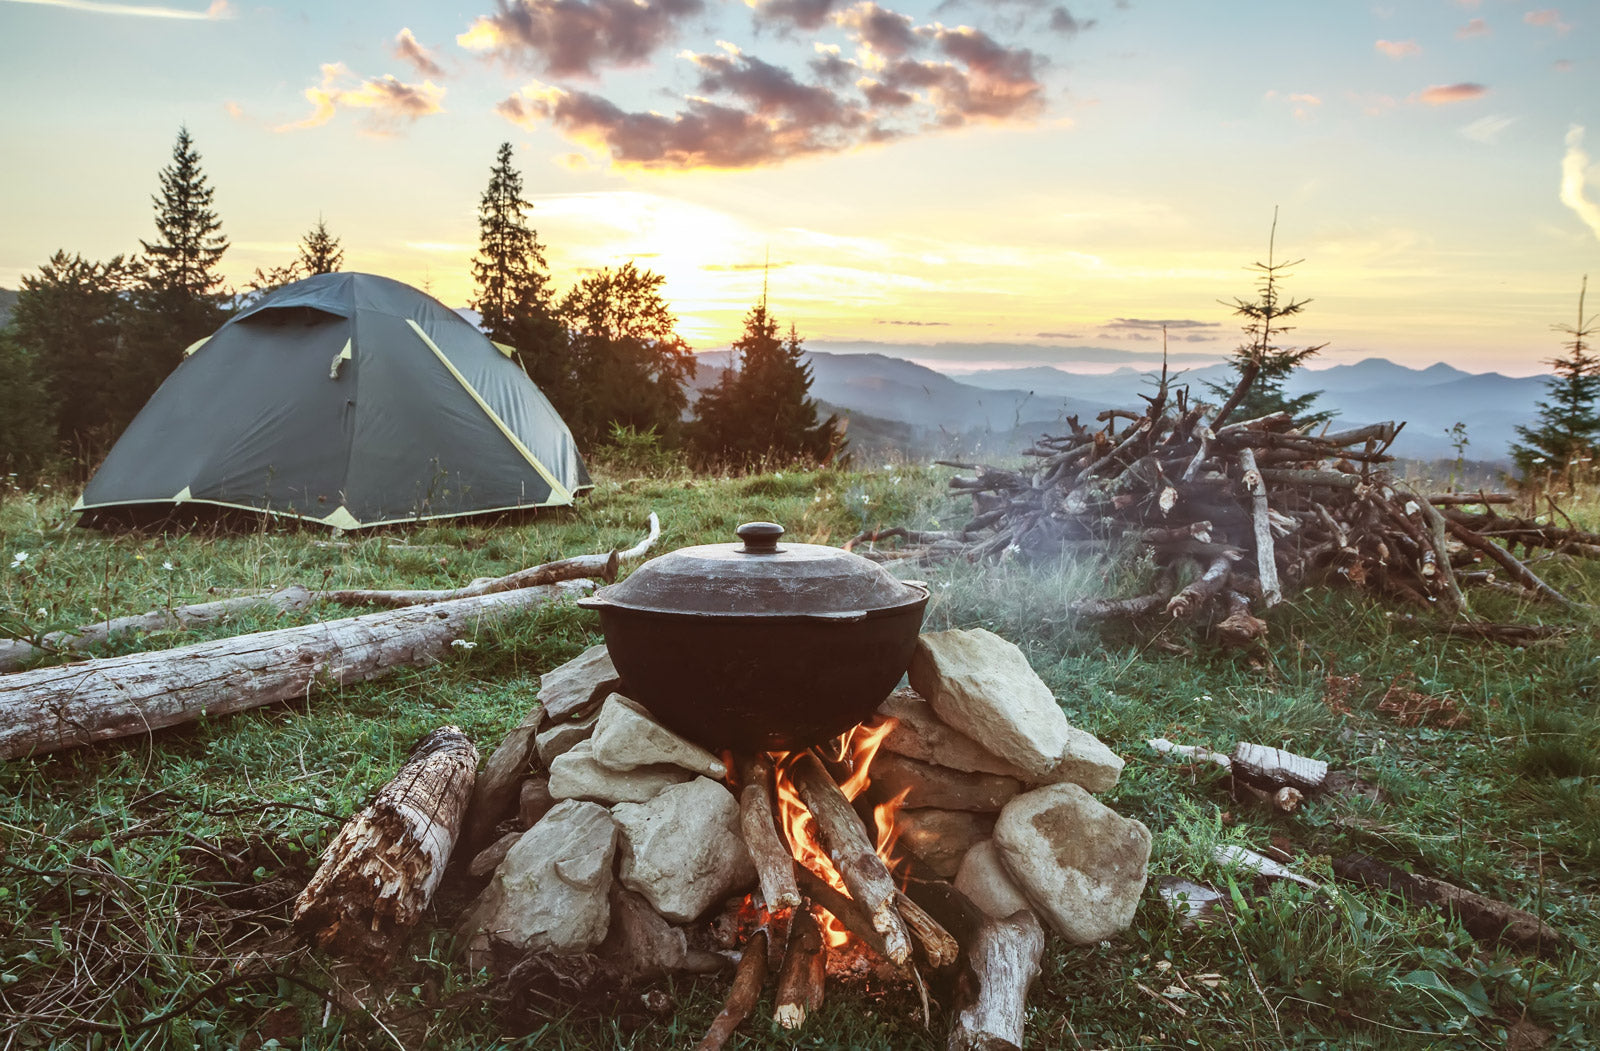 8 Quick and Easy Family Camping Food Ideas